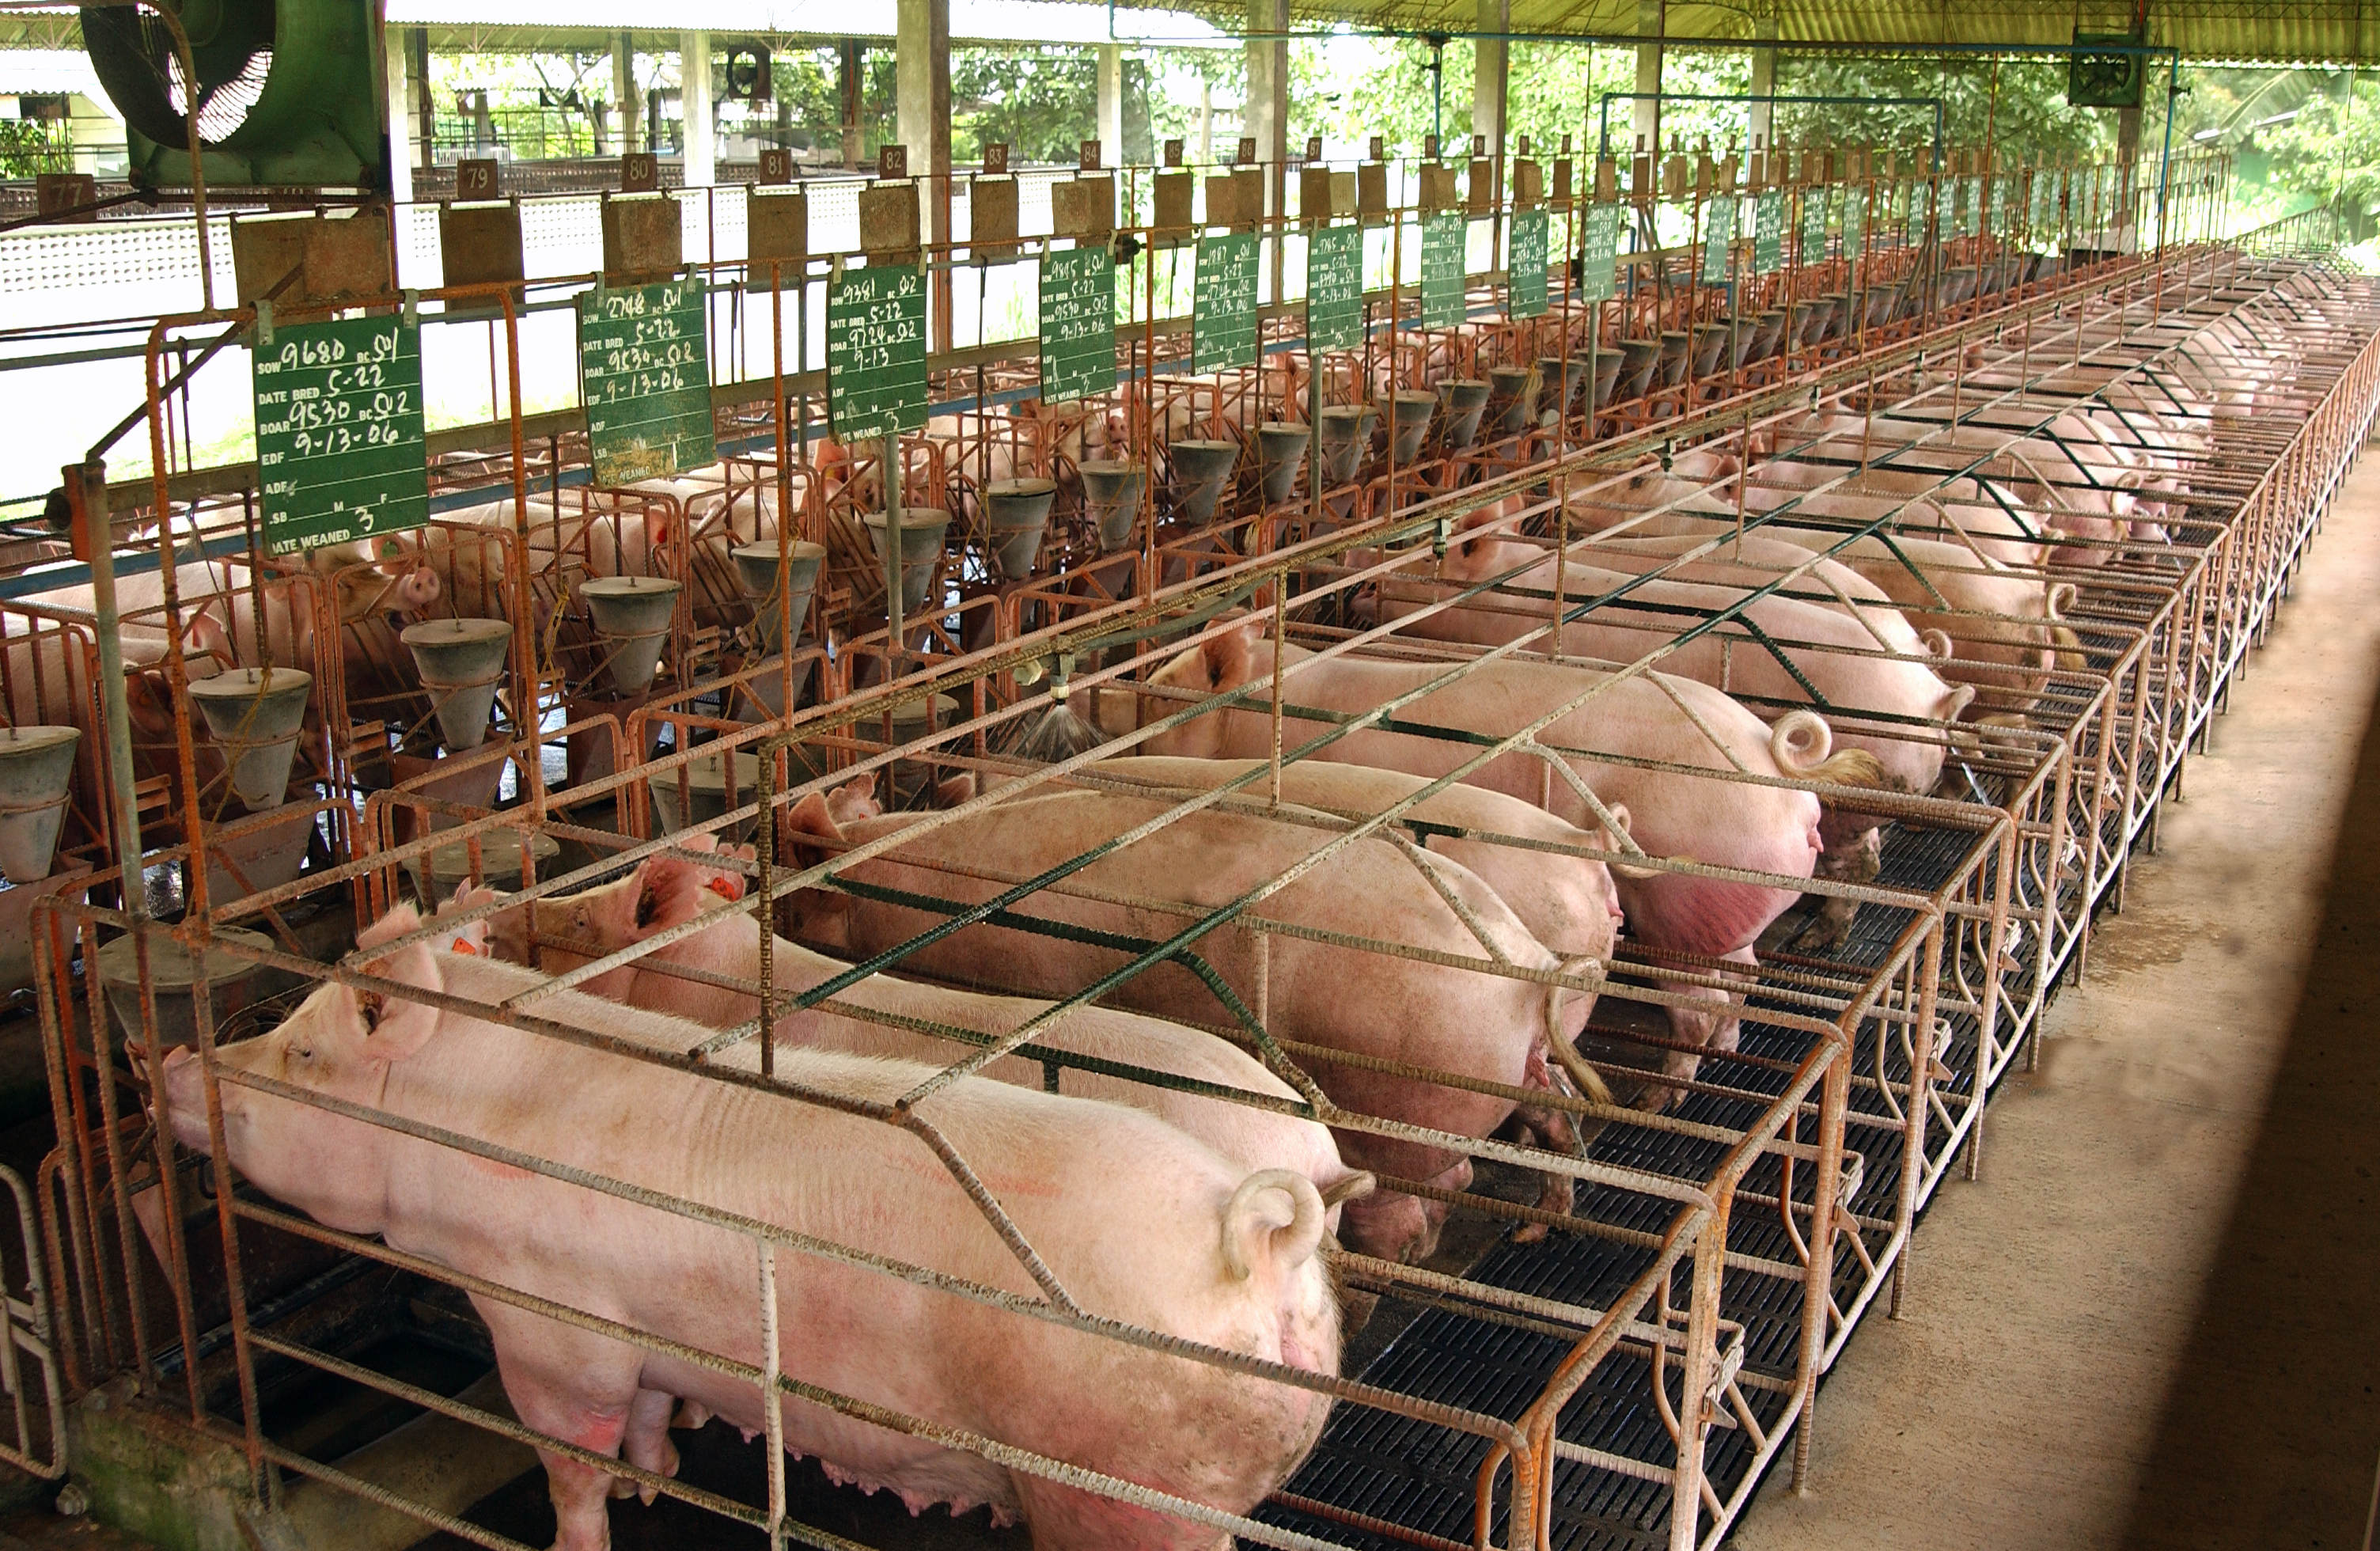 sows in stalls in an intensive farming system